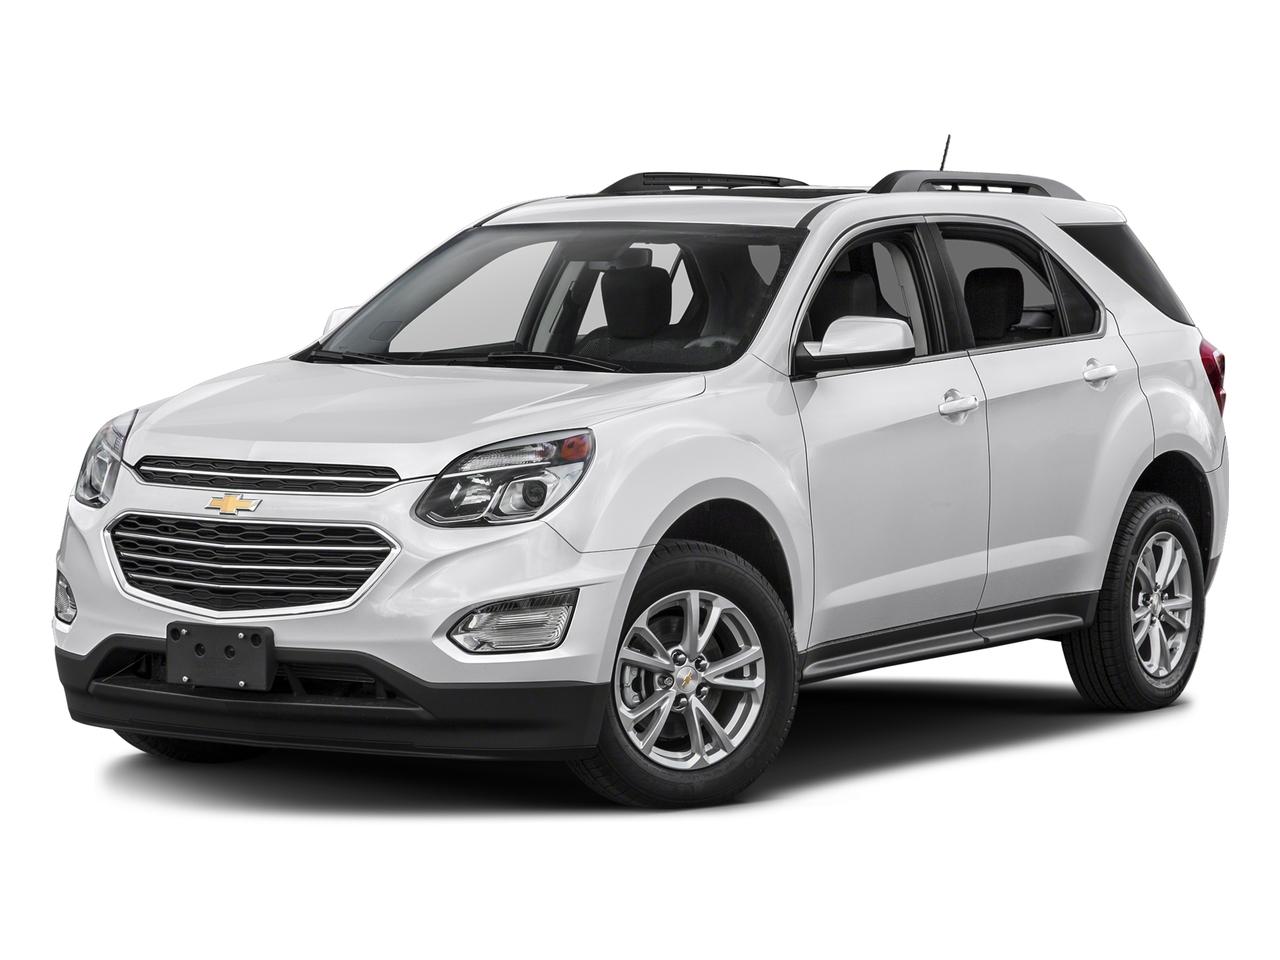 2016 Chevrolet Equinox Vehicle Photo in Plainfield, IL 60586